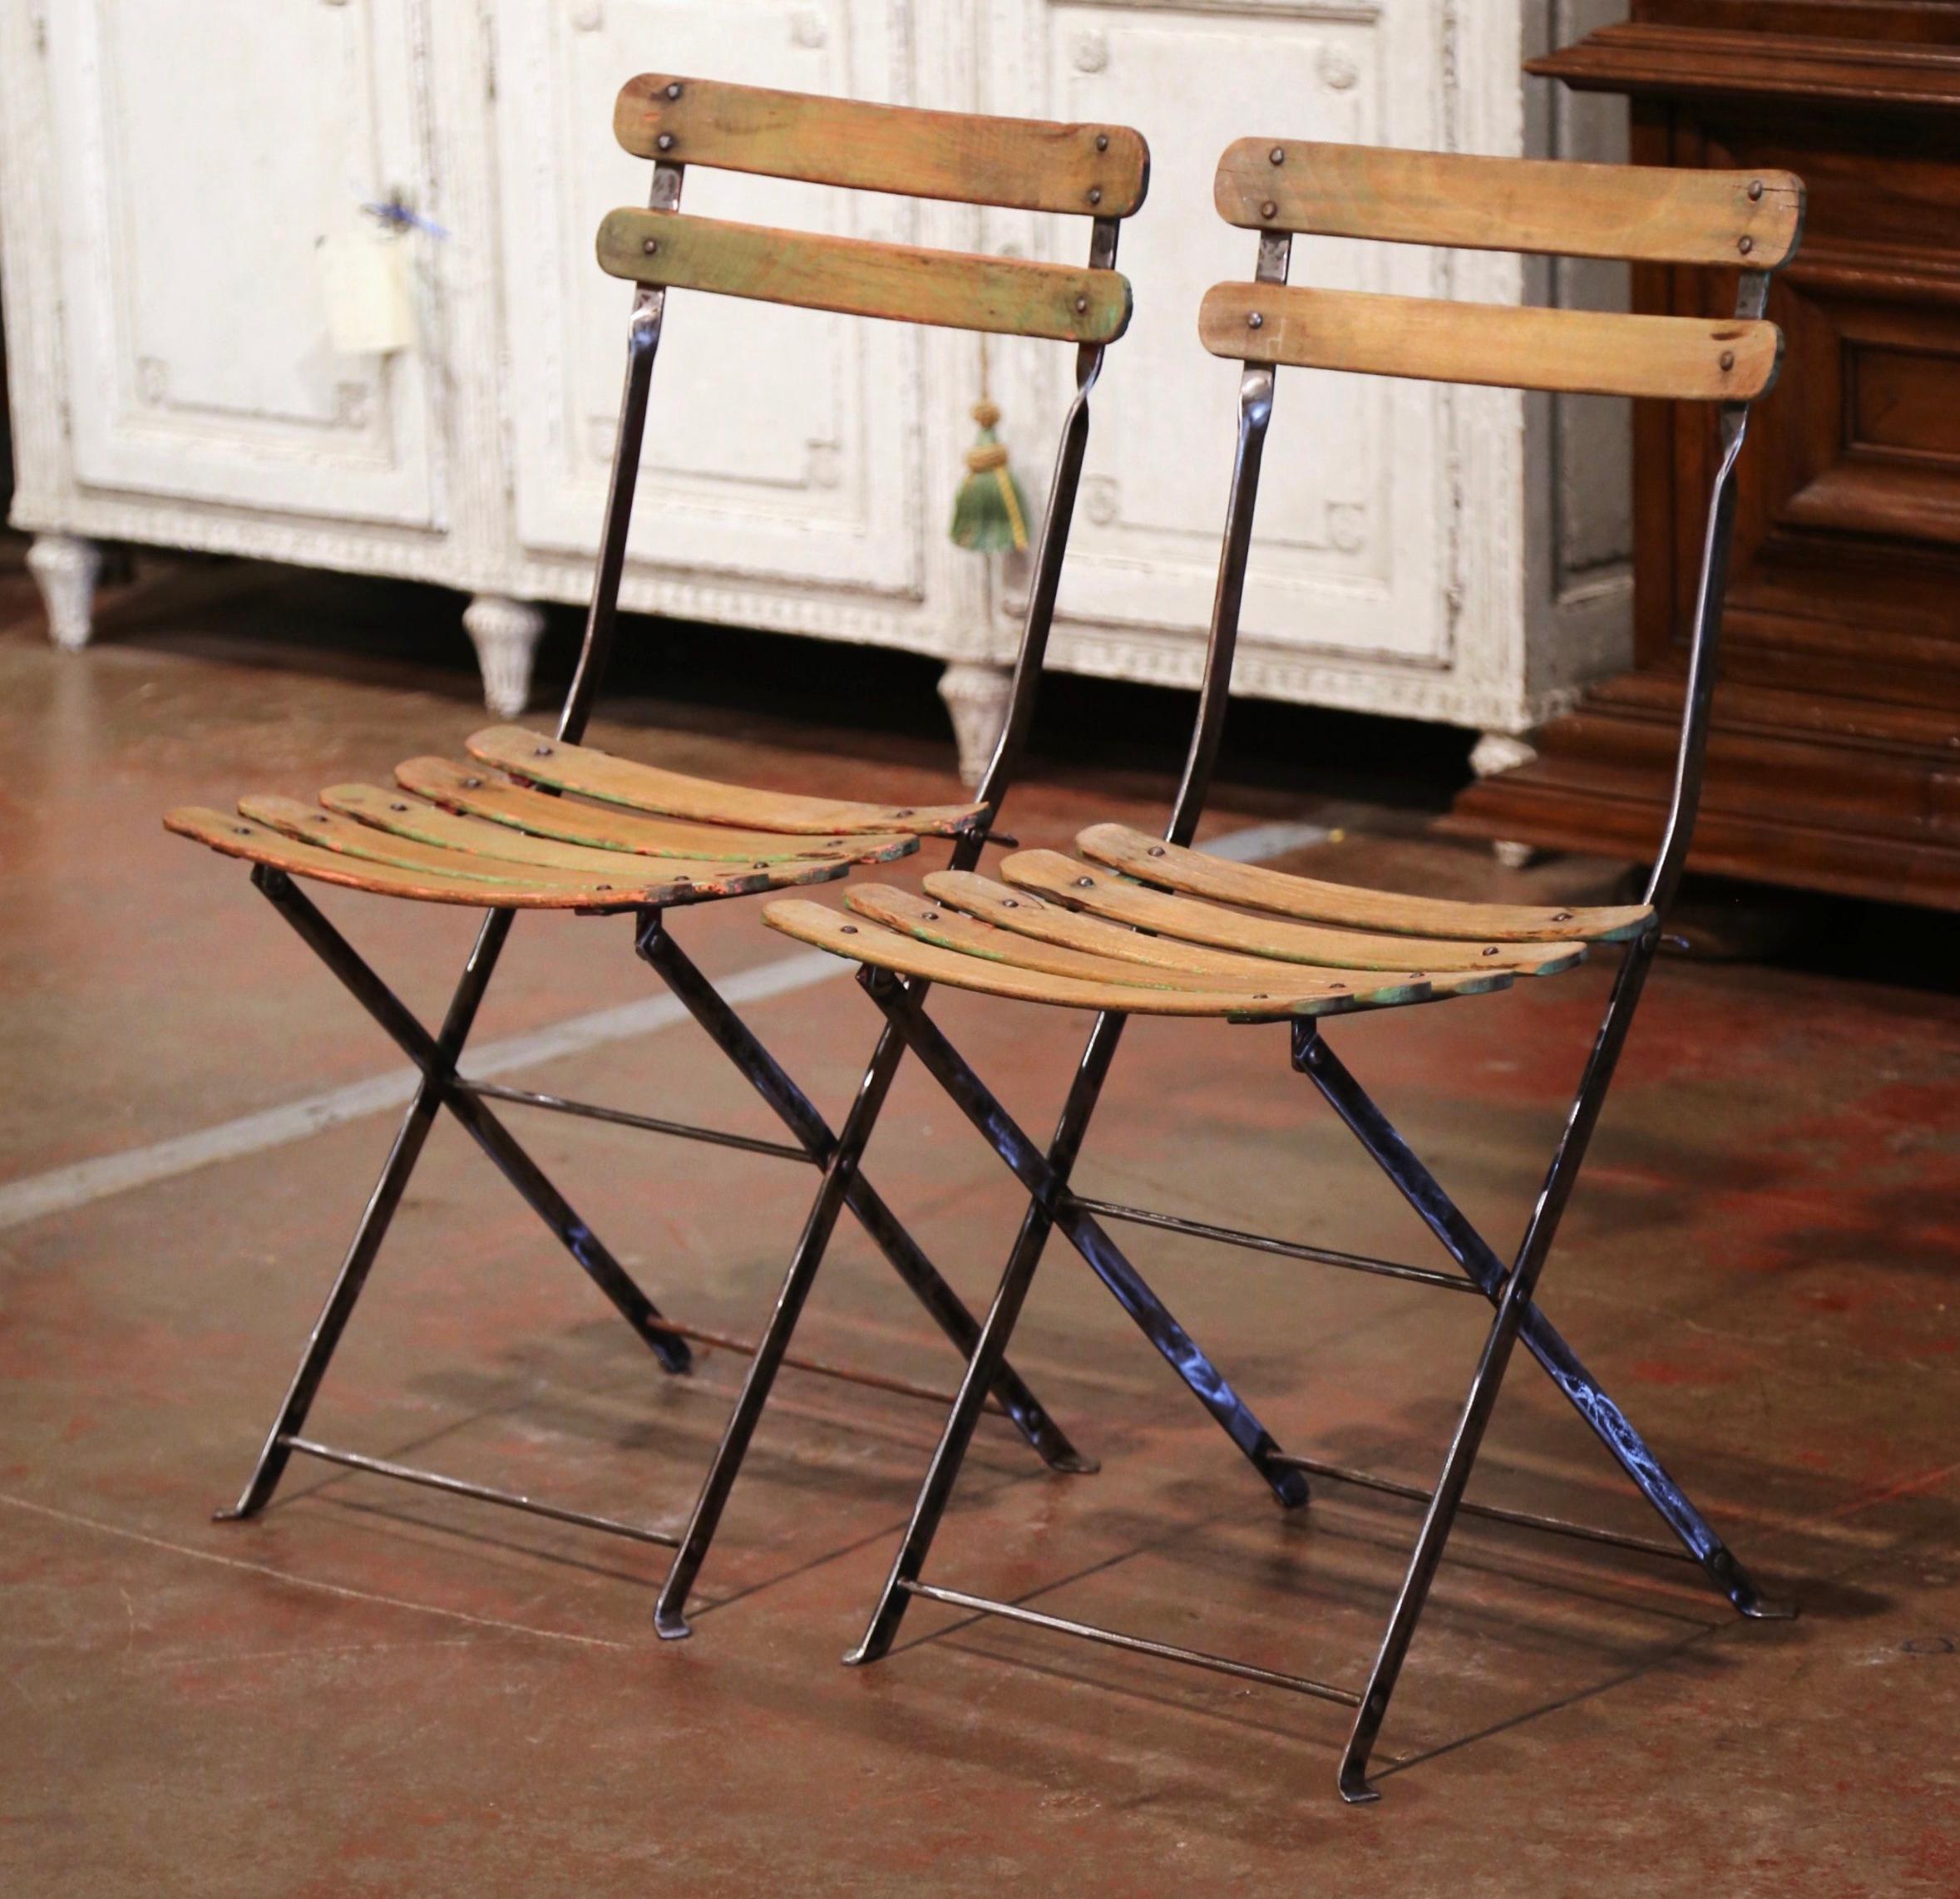 These antique chairs were crafted in Normandy, France, circa 1920. Made of iron and pine, each chair dressed with two-ladder back and five-slat seat, features a folding mechanism for ultimate compact storage (less than 2